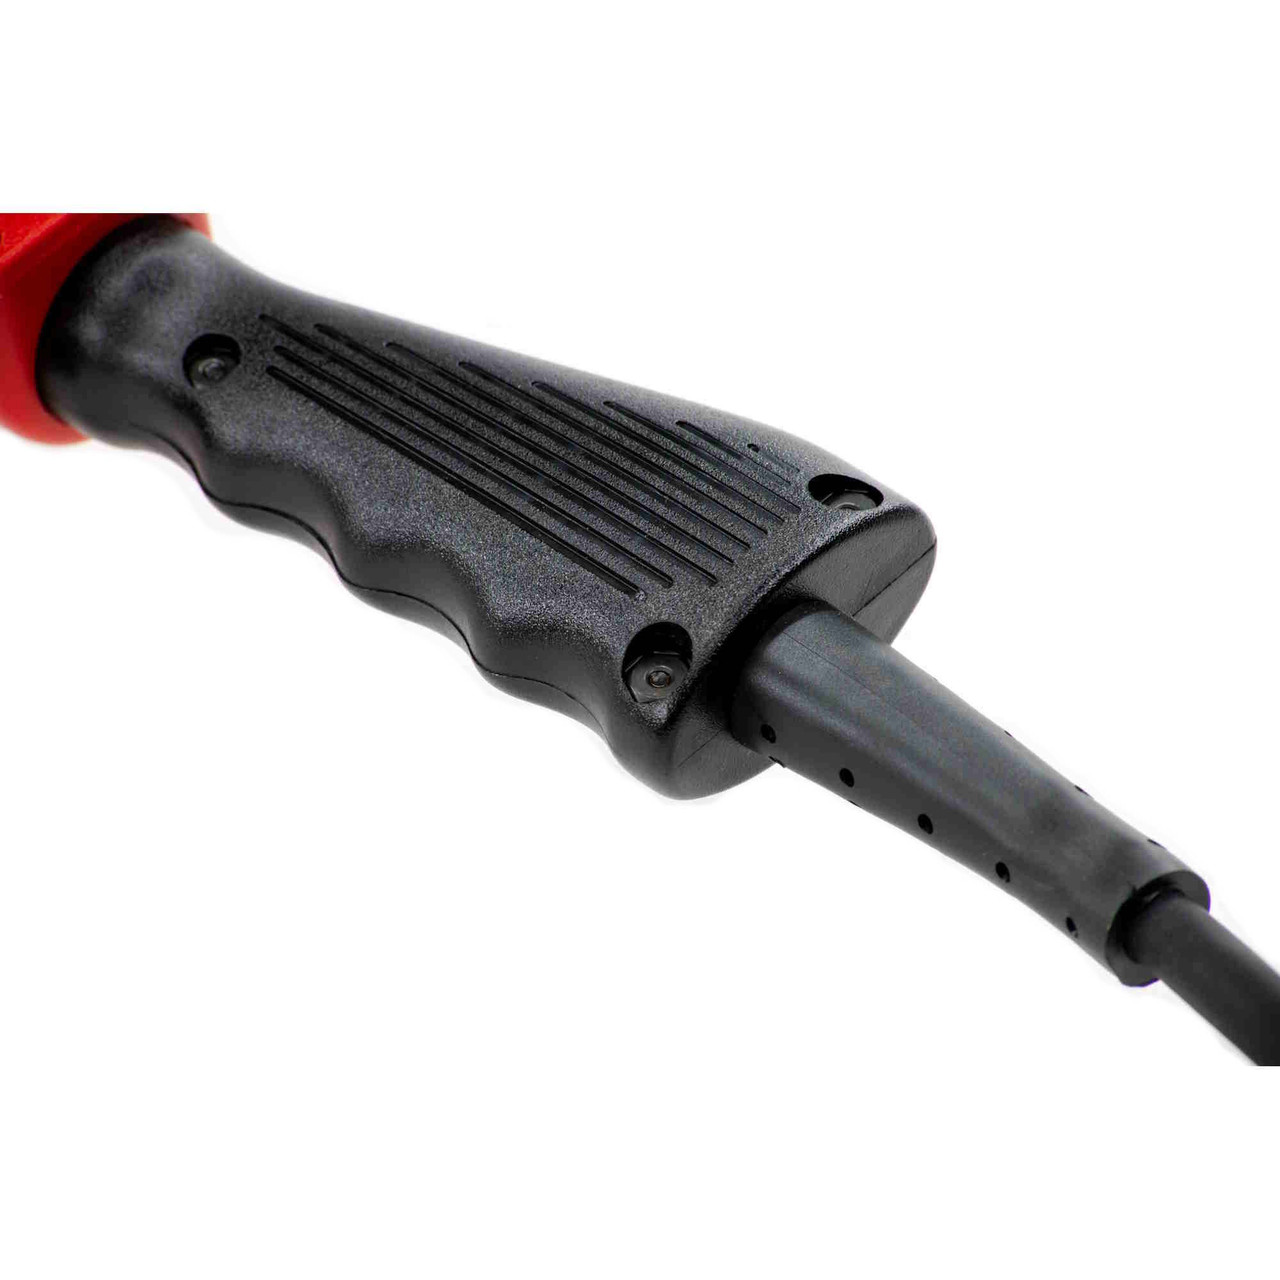 Molded strain relief provides protection for heat gun and damage to the heat gun cord.